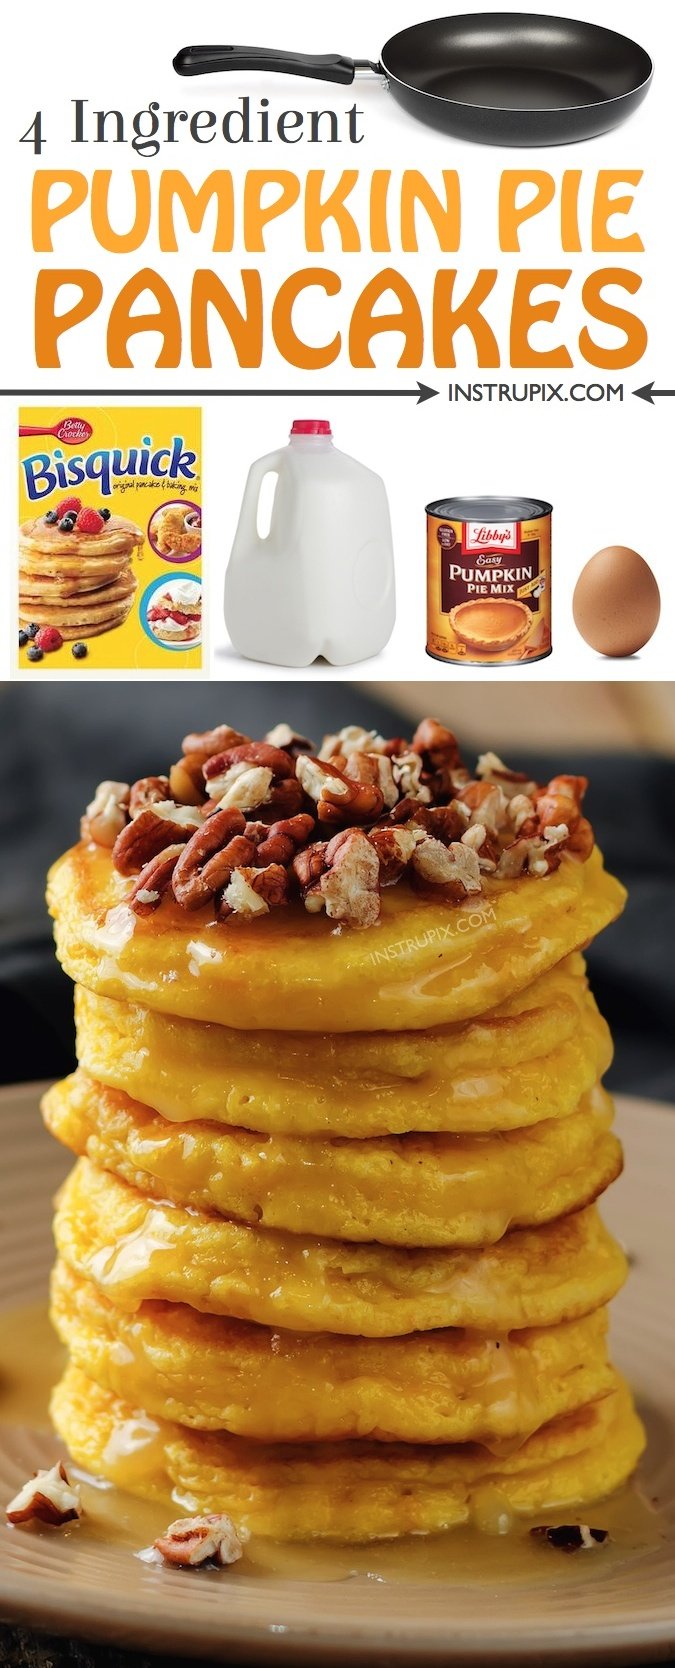 Easy pumpkin pie pancakes made with just 4 ingredients! These pumpkin spice pancakes are AMAZING! Made with bisquick, pumpkin pie filing, milk and an egg. The perfect fall breakfast idea! Instrupix.com